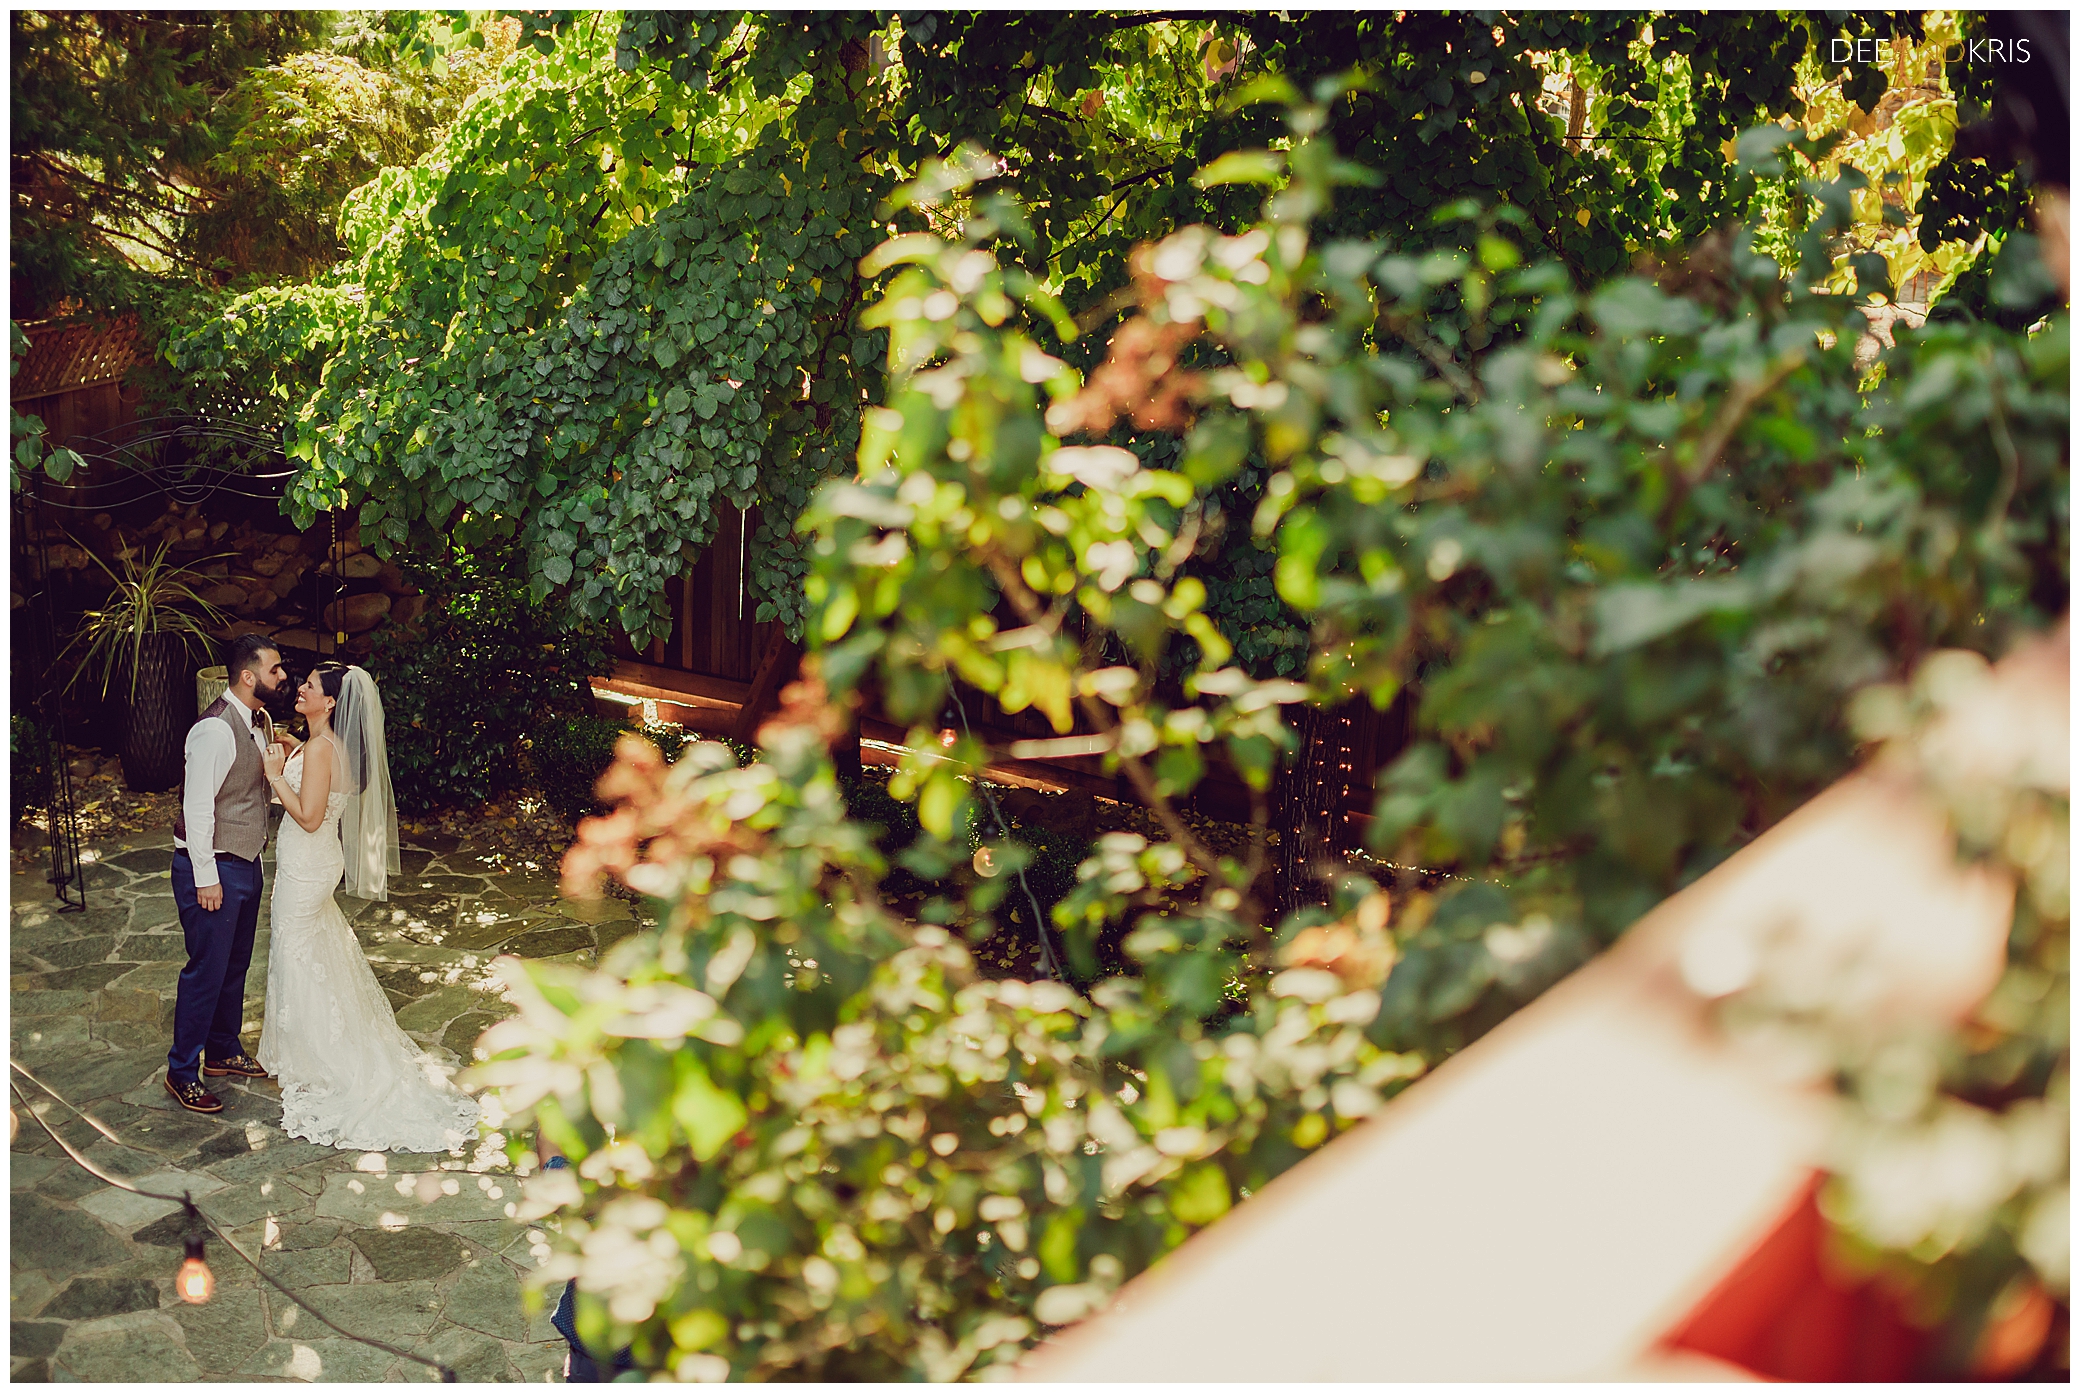 First look with Bride and Groom at October wedding at Forest House Lodge in Forest hill